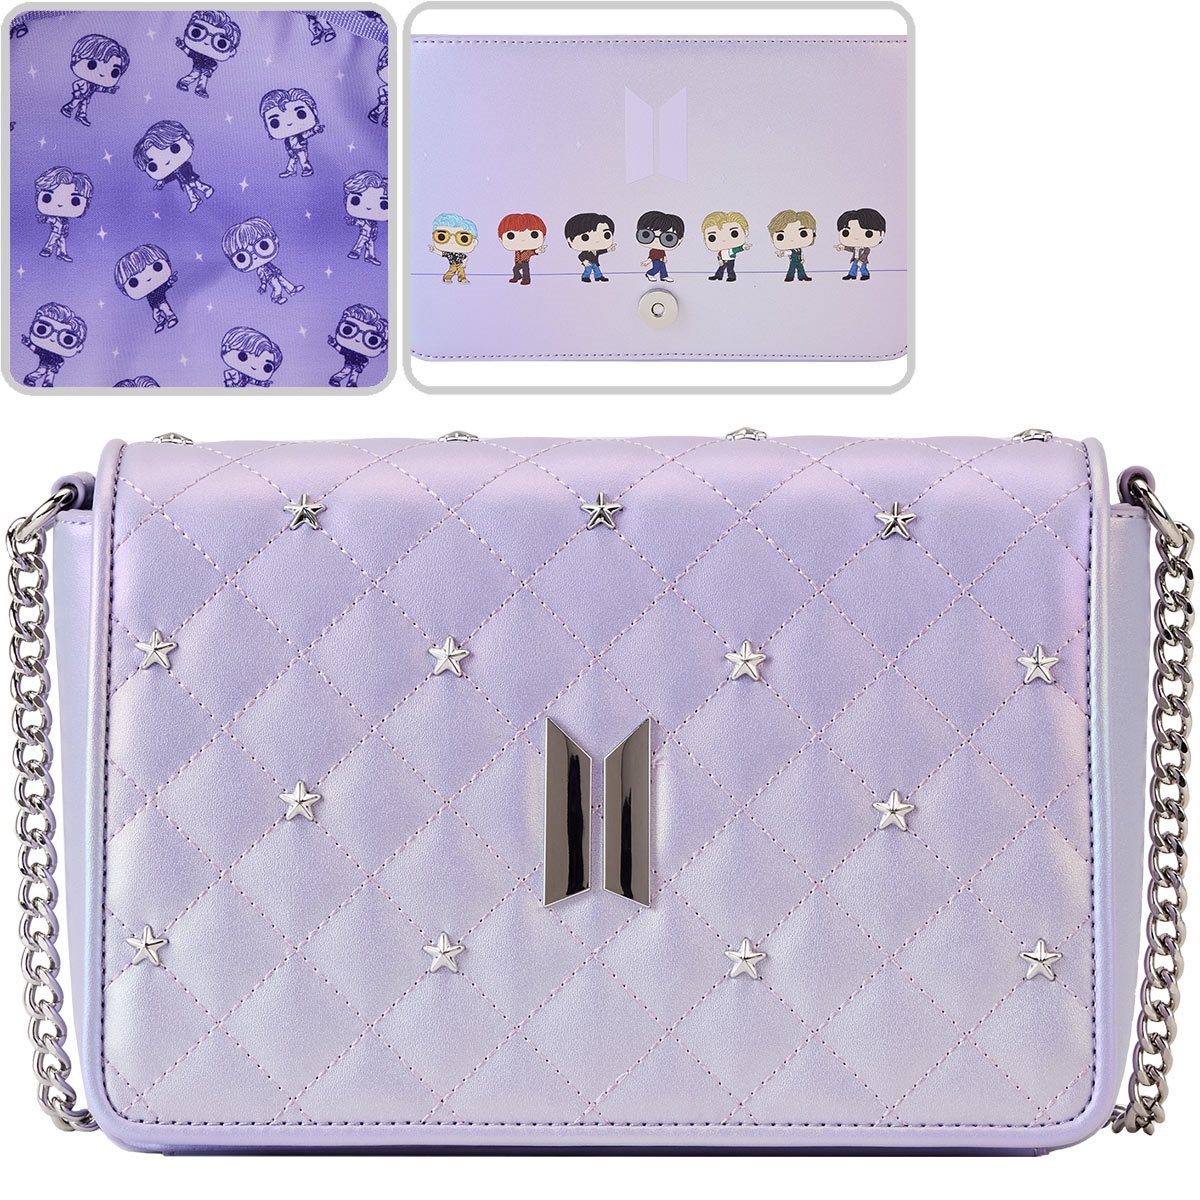 Loungefly Big Hit Entertainment BTS Pop Mini Backpack